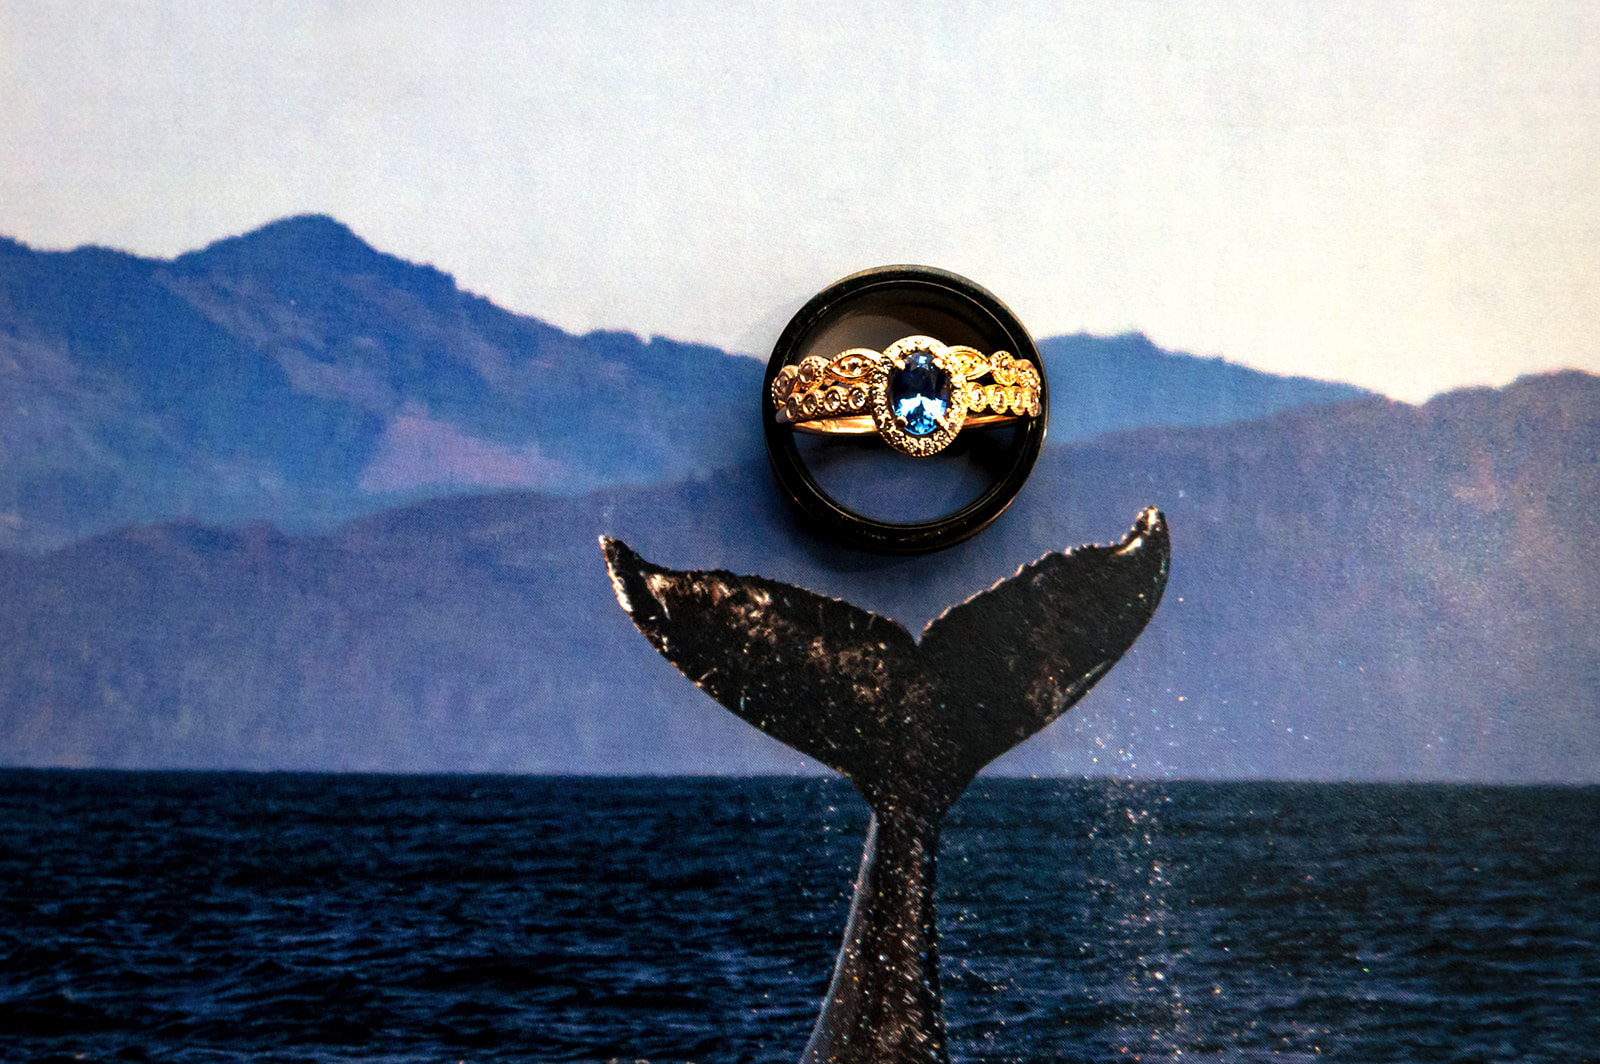 Cool image of wedding rings on Vancouver island